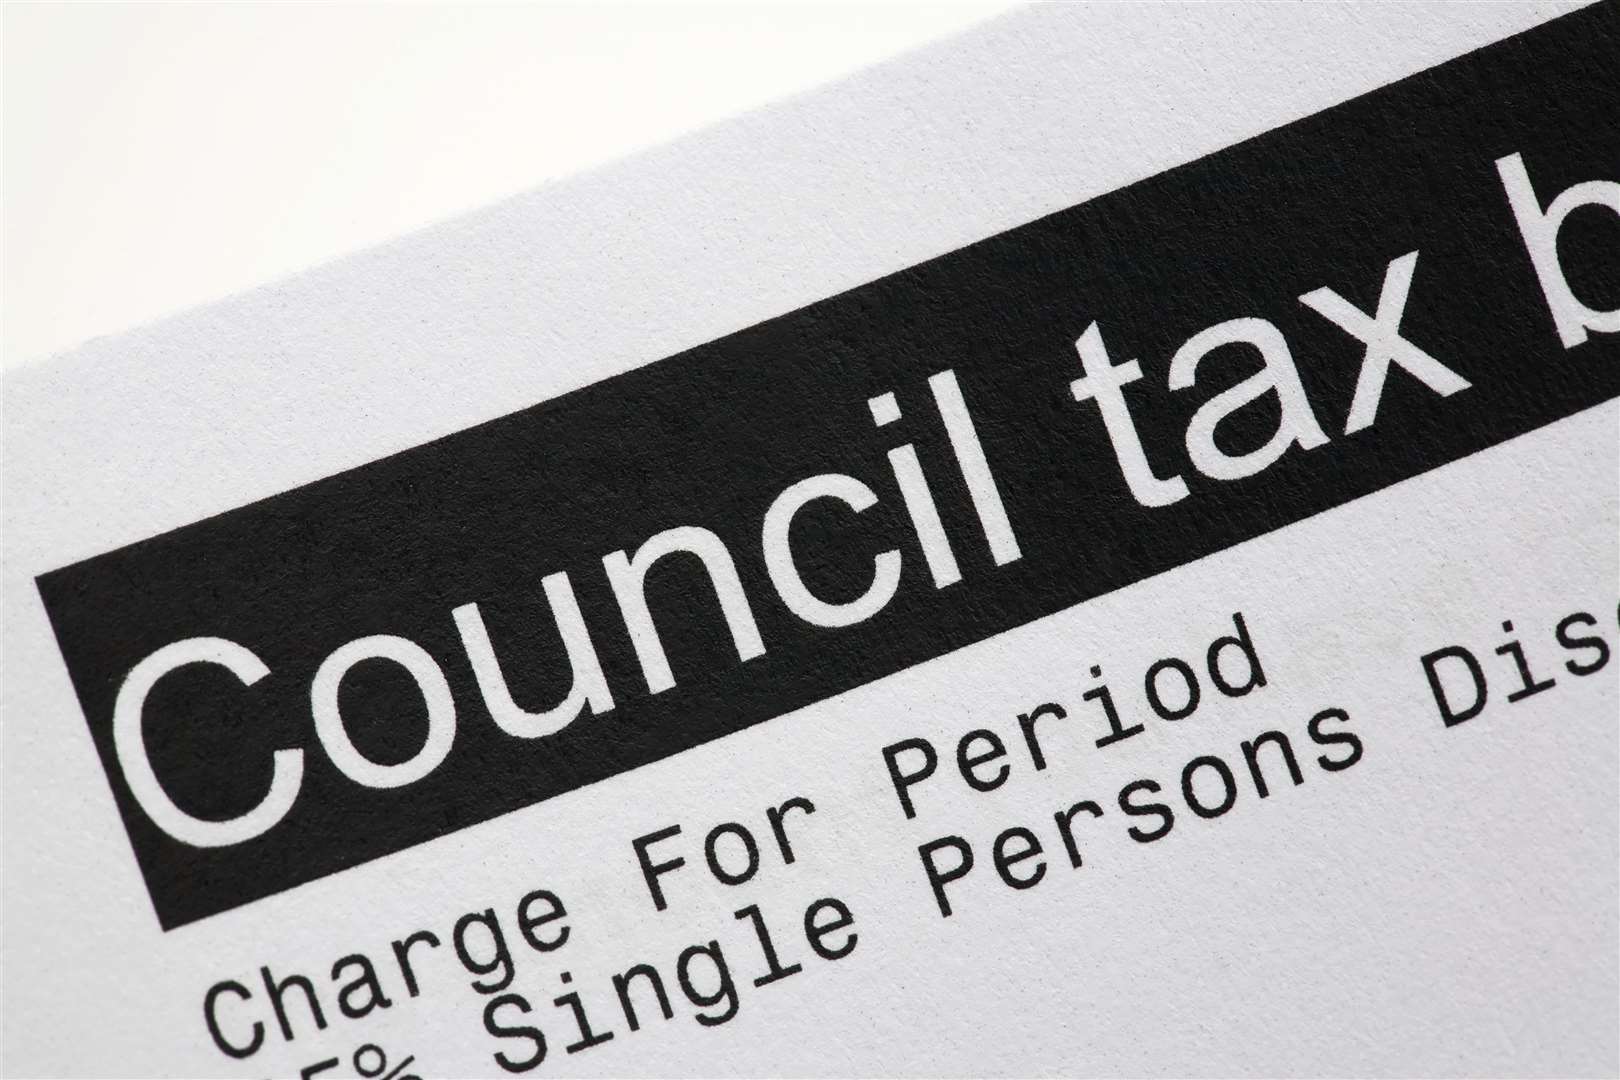 Council tax proposals have been slammed.